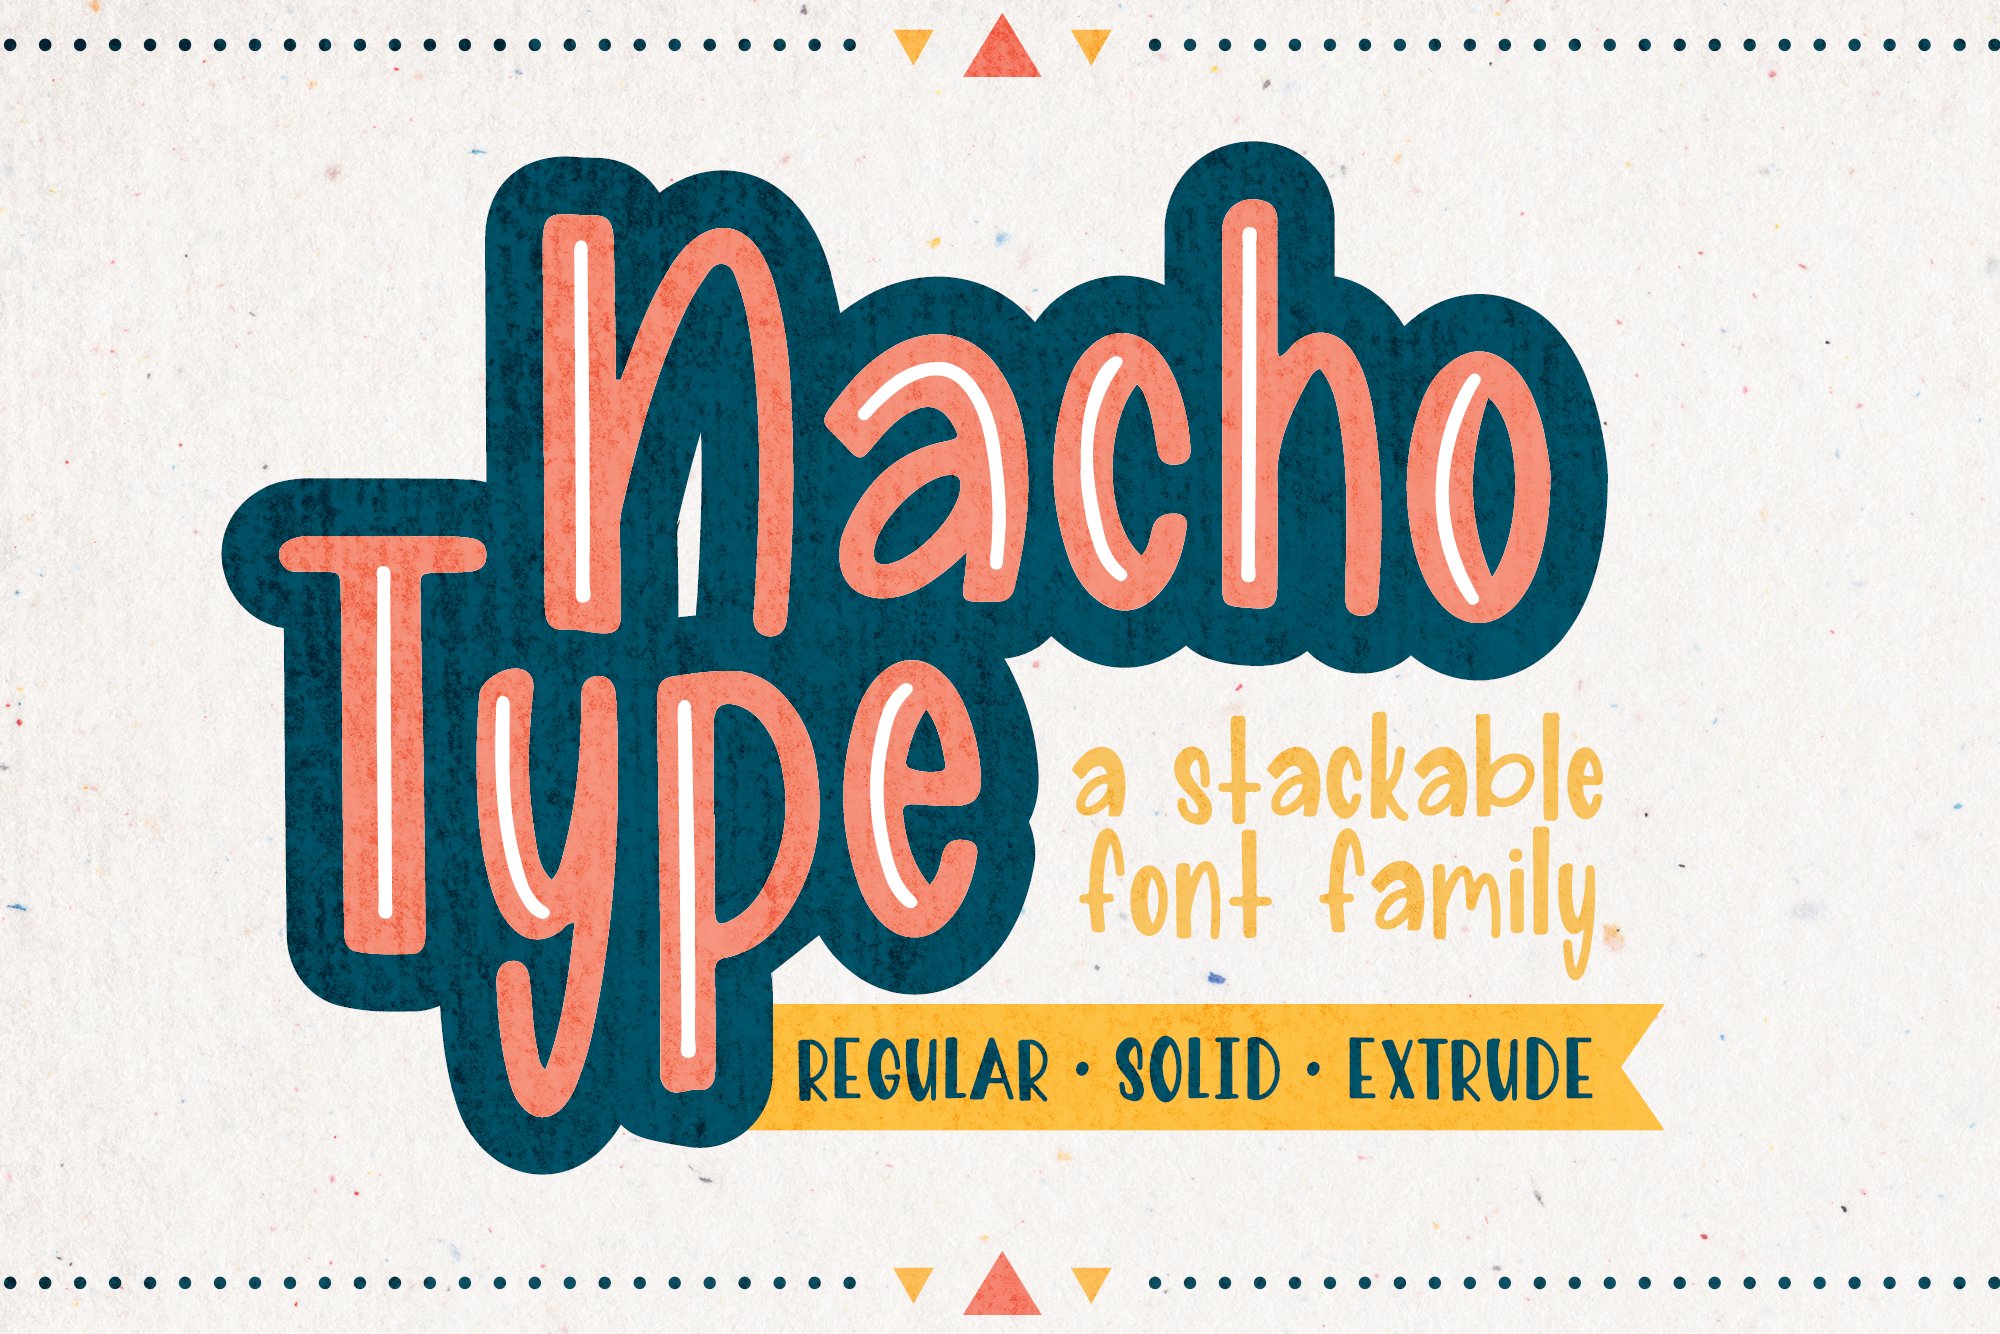 Nacho Type - Stackable Font Family cover image.